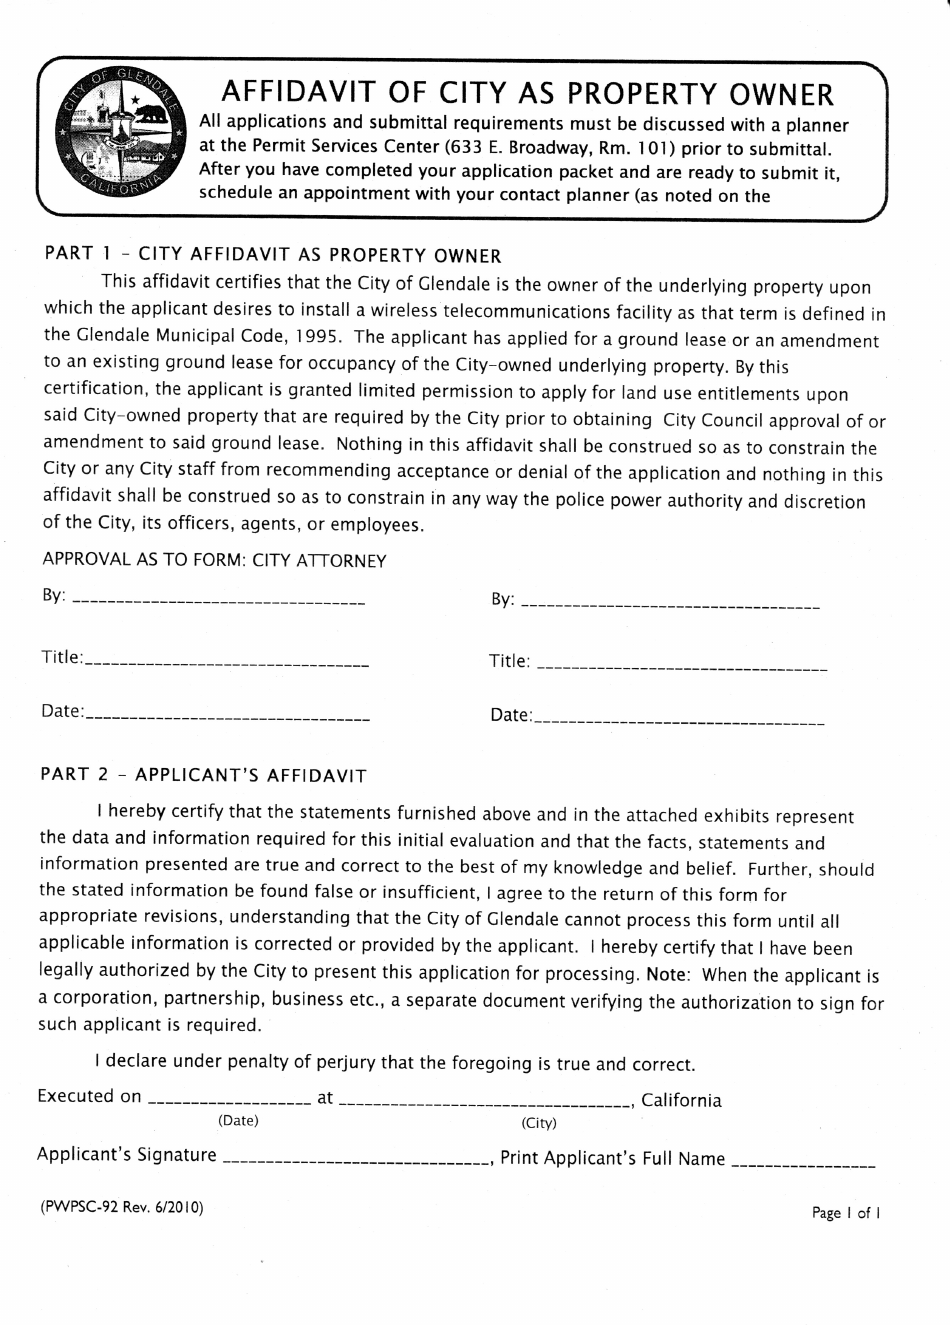 Form PWPSC-92 Affidavit of City as Property Owner - City of Glendale, California, Page 1